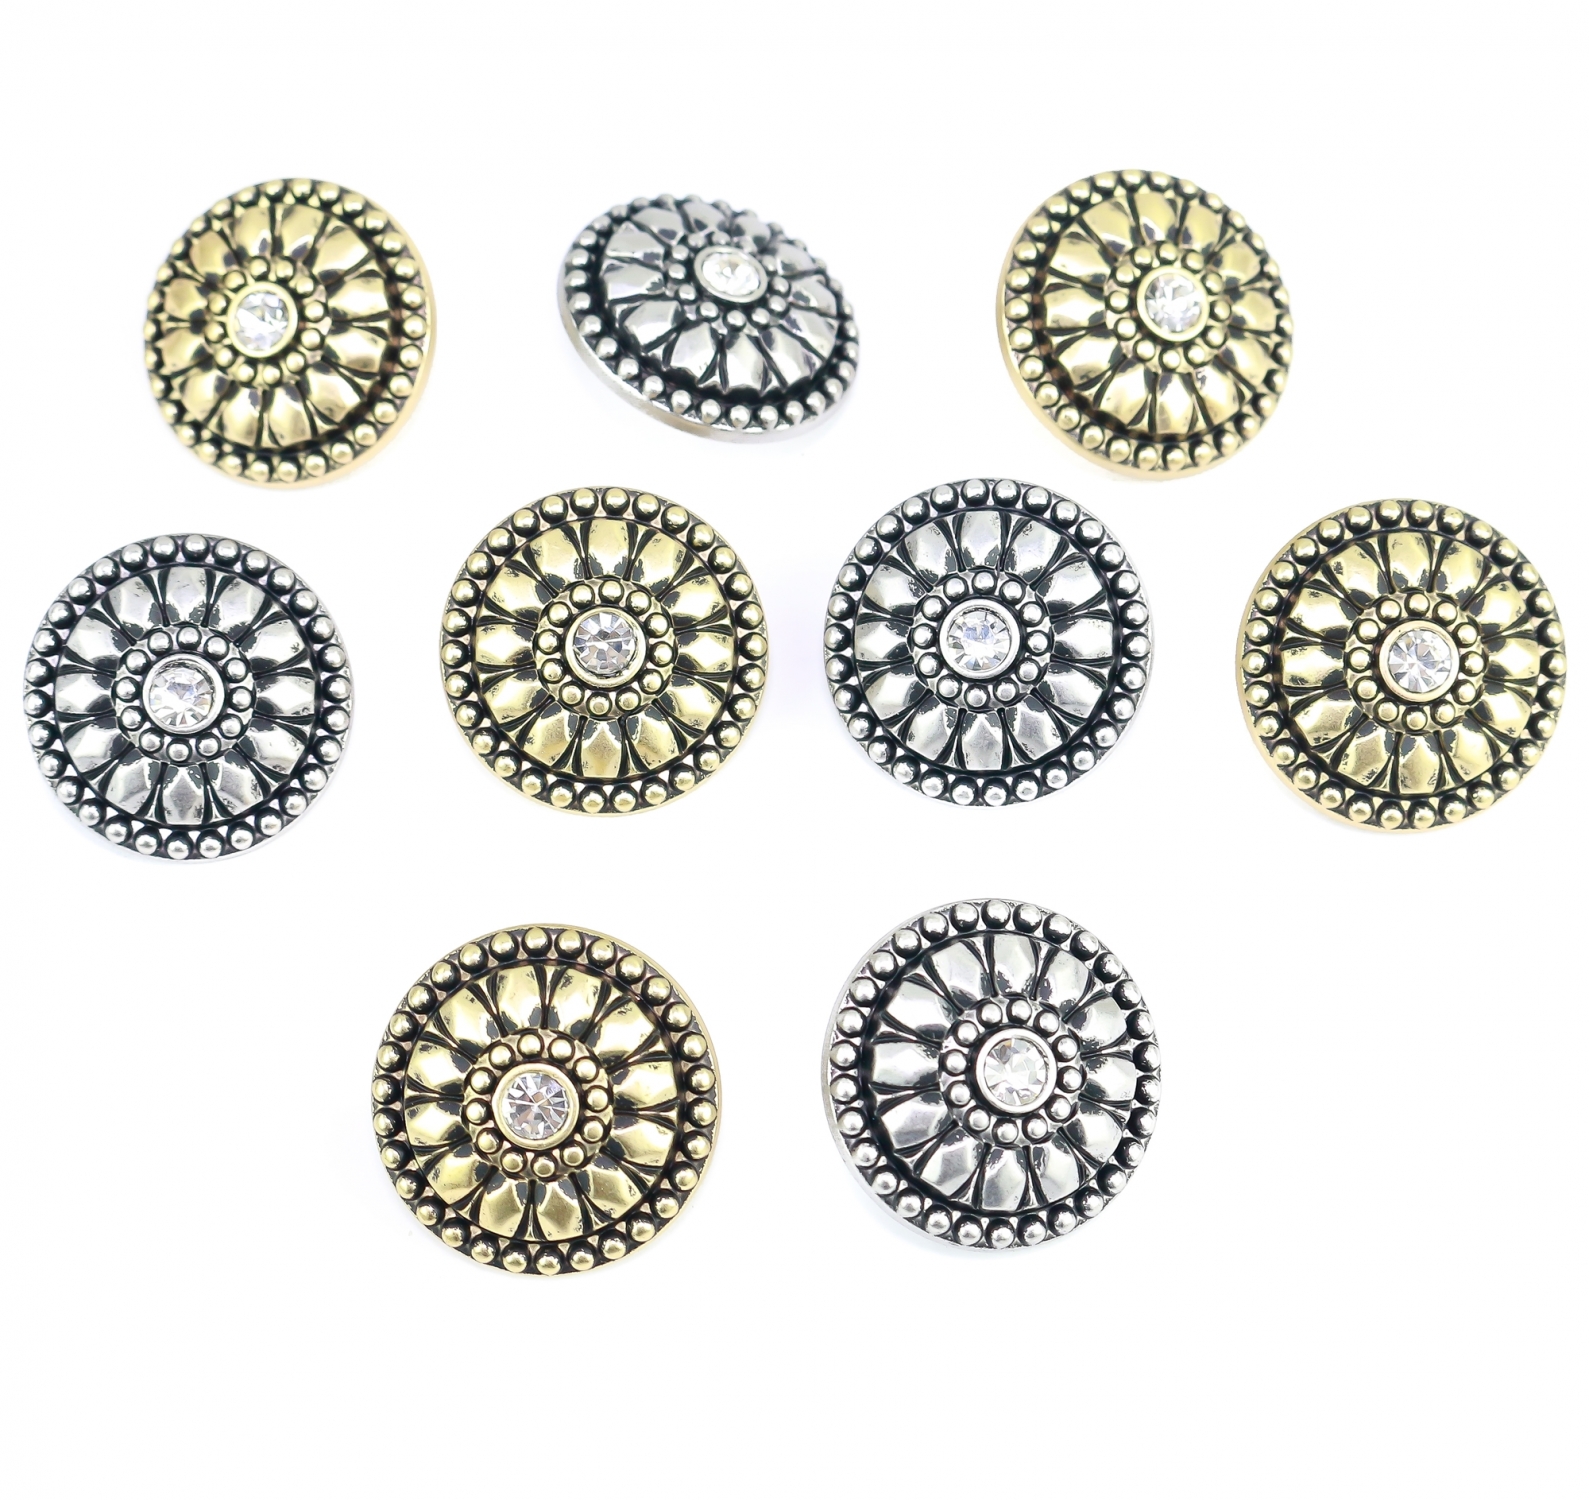 Plastic Metallized Shank Buttons, size 32 (100 pcs/pack) Code: S777